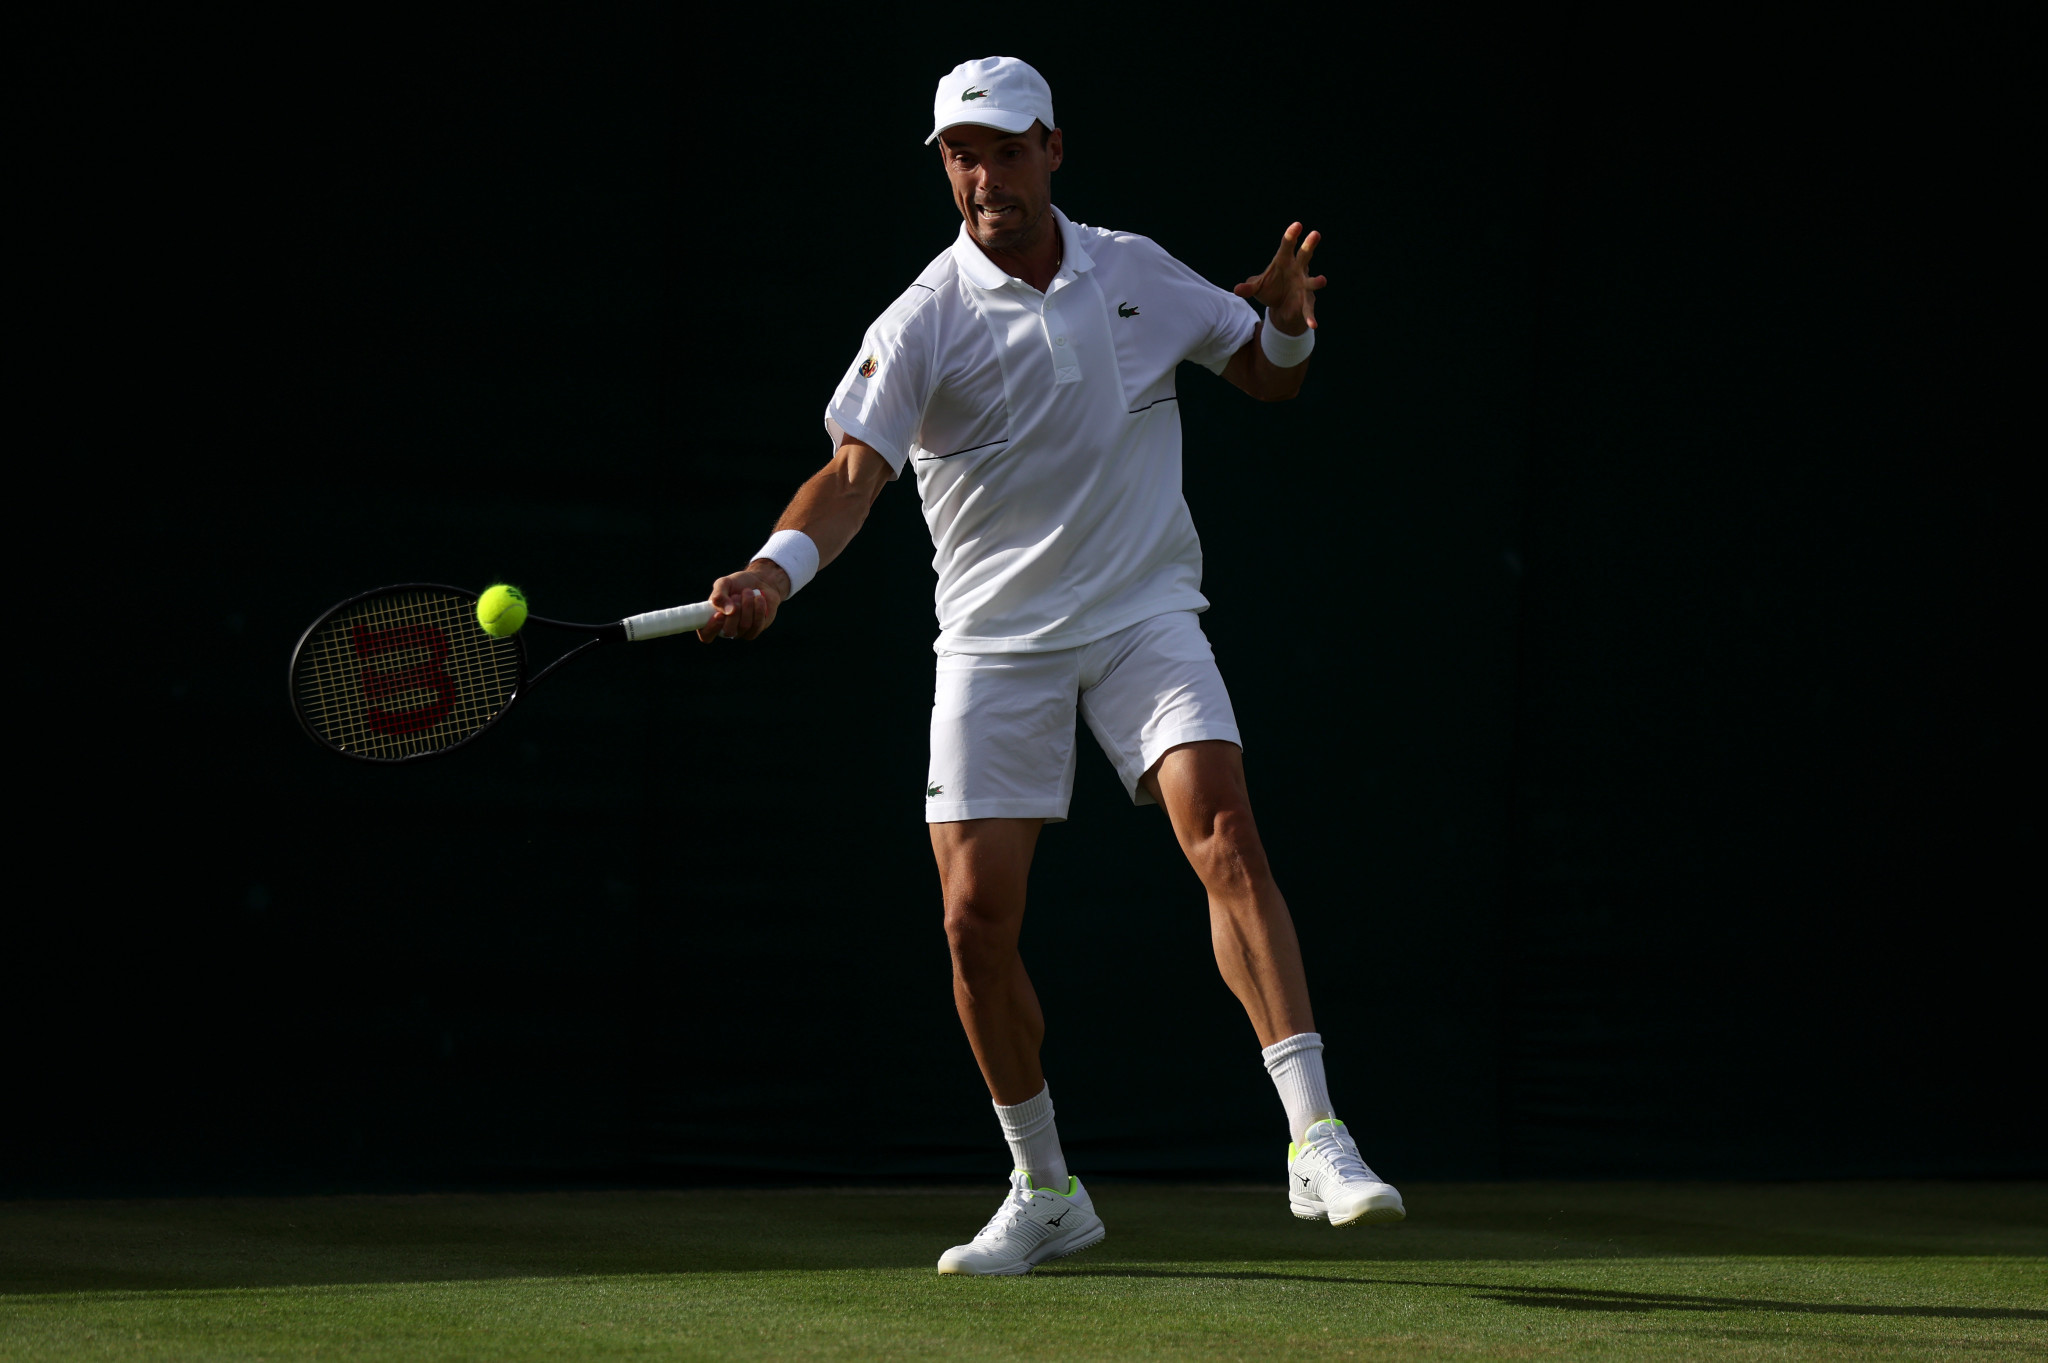 Bautista-Agut becomes third member of men’s singles draw to pull out of Wimbledon due to COVID-19